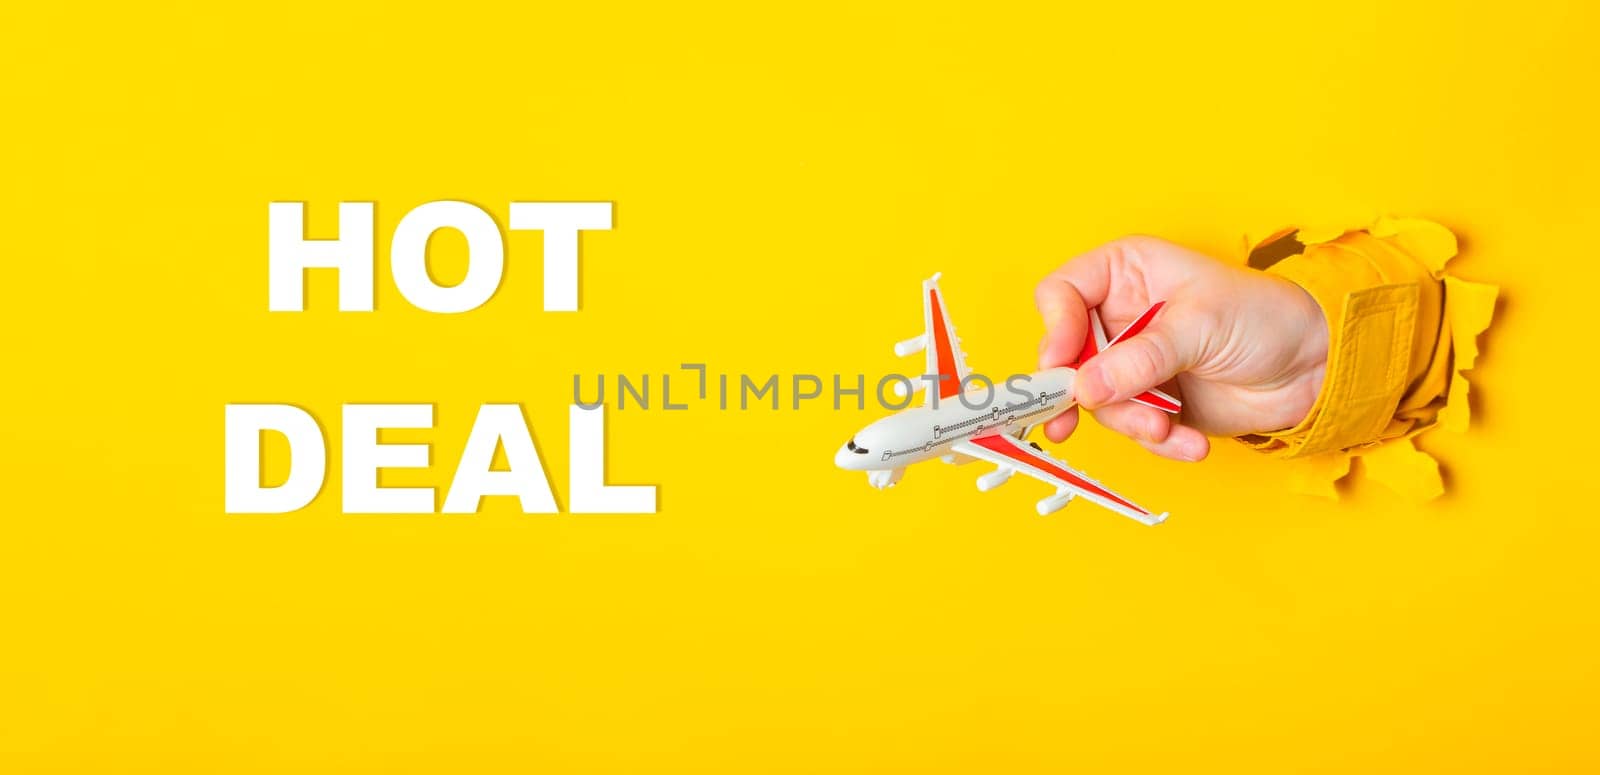 A hand holding a toy airplane with the words Hot Deal written underneath. The image has a playful and lighthearted mood, suggesting that the toy airplane is on sale for a good price